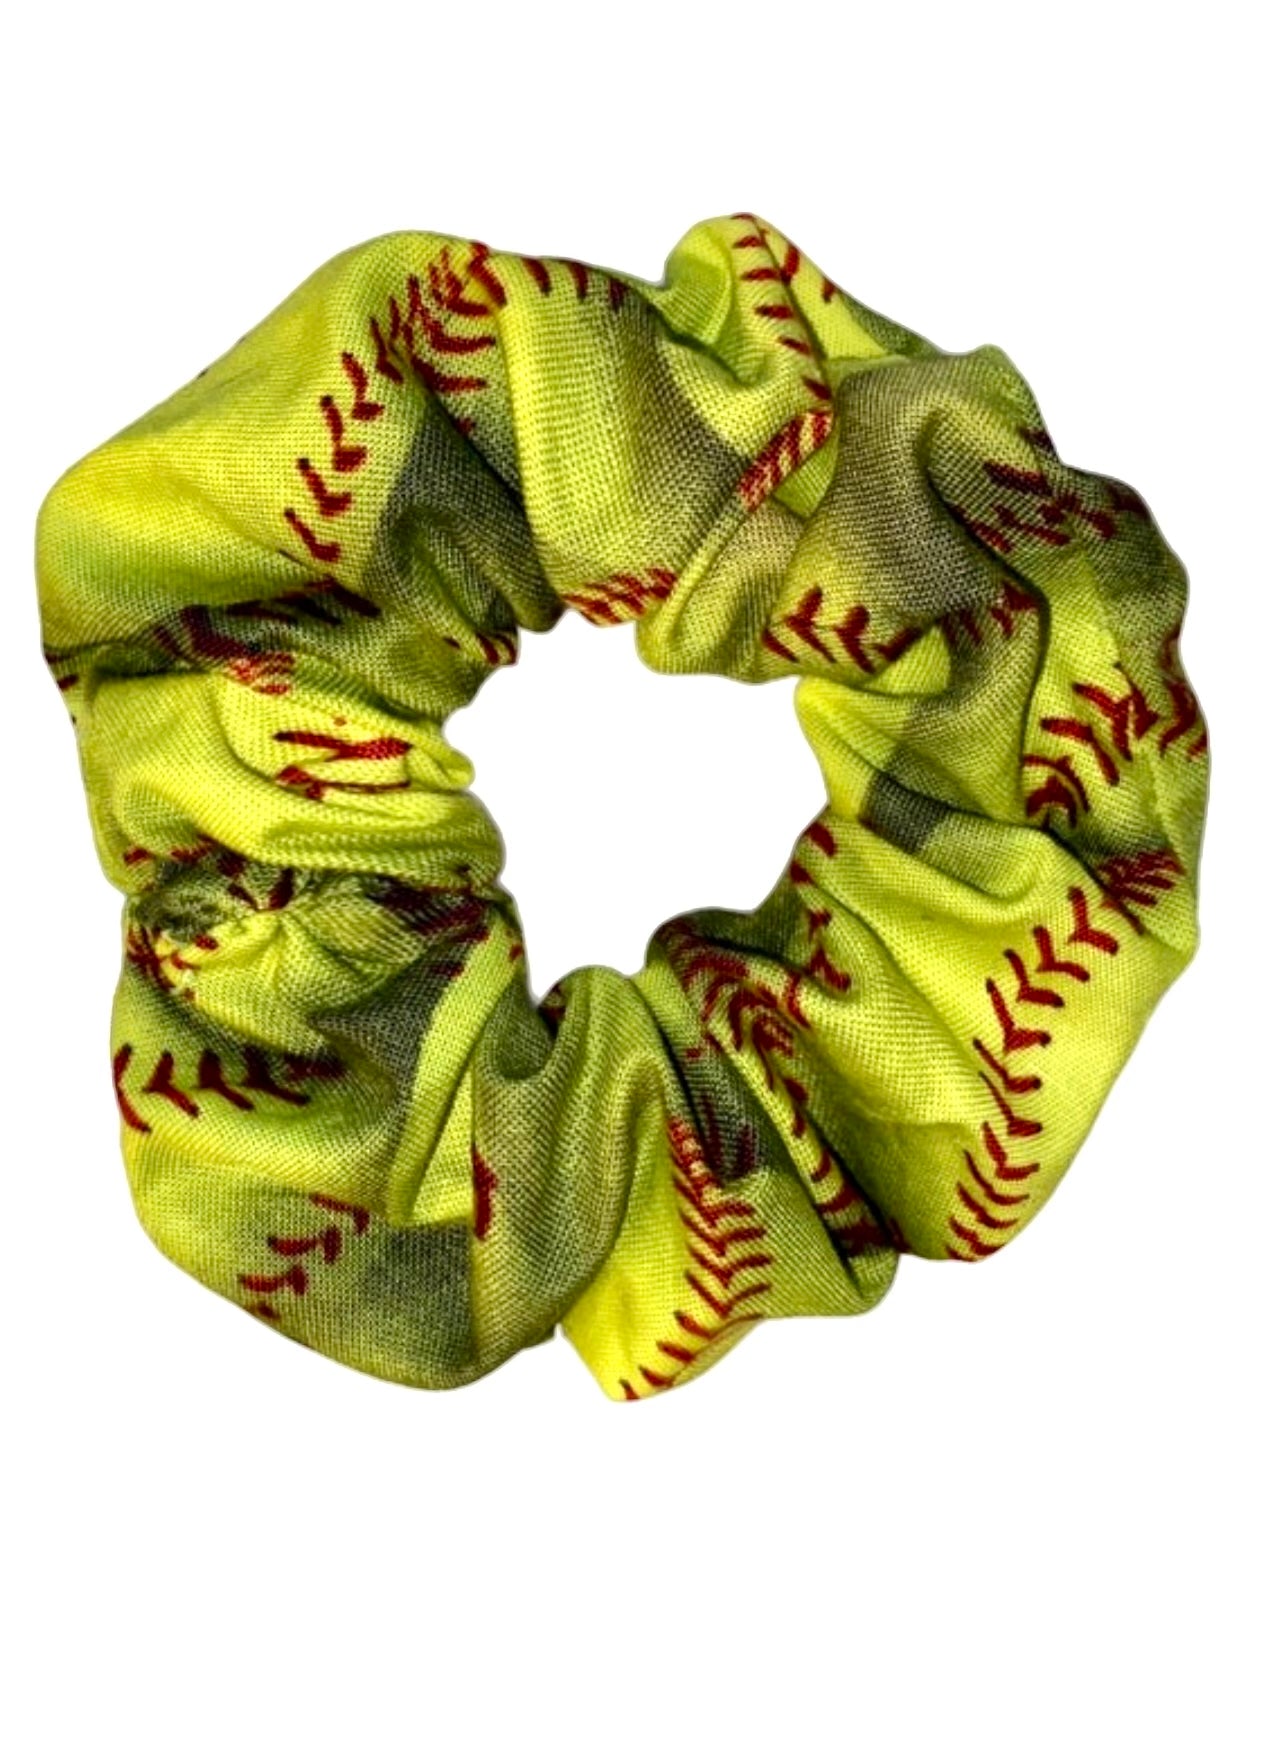 Tied Together Softball scrunchie